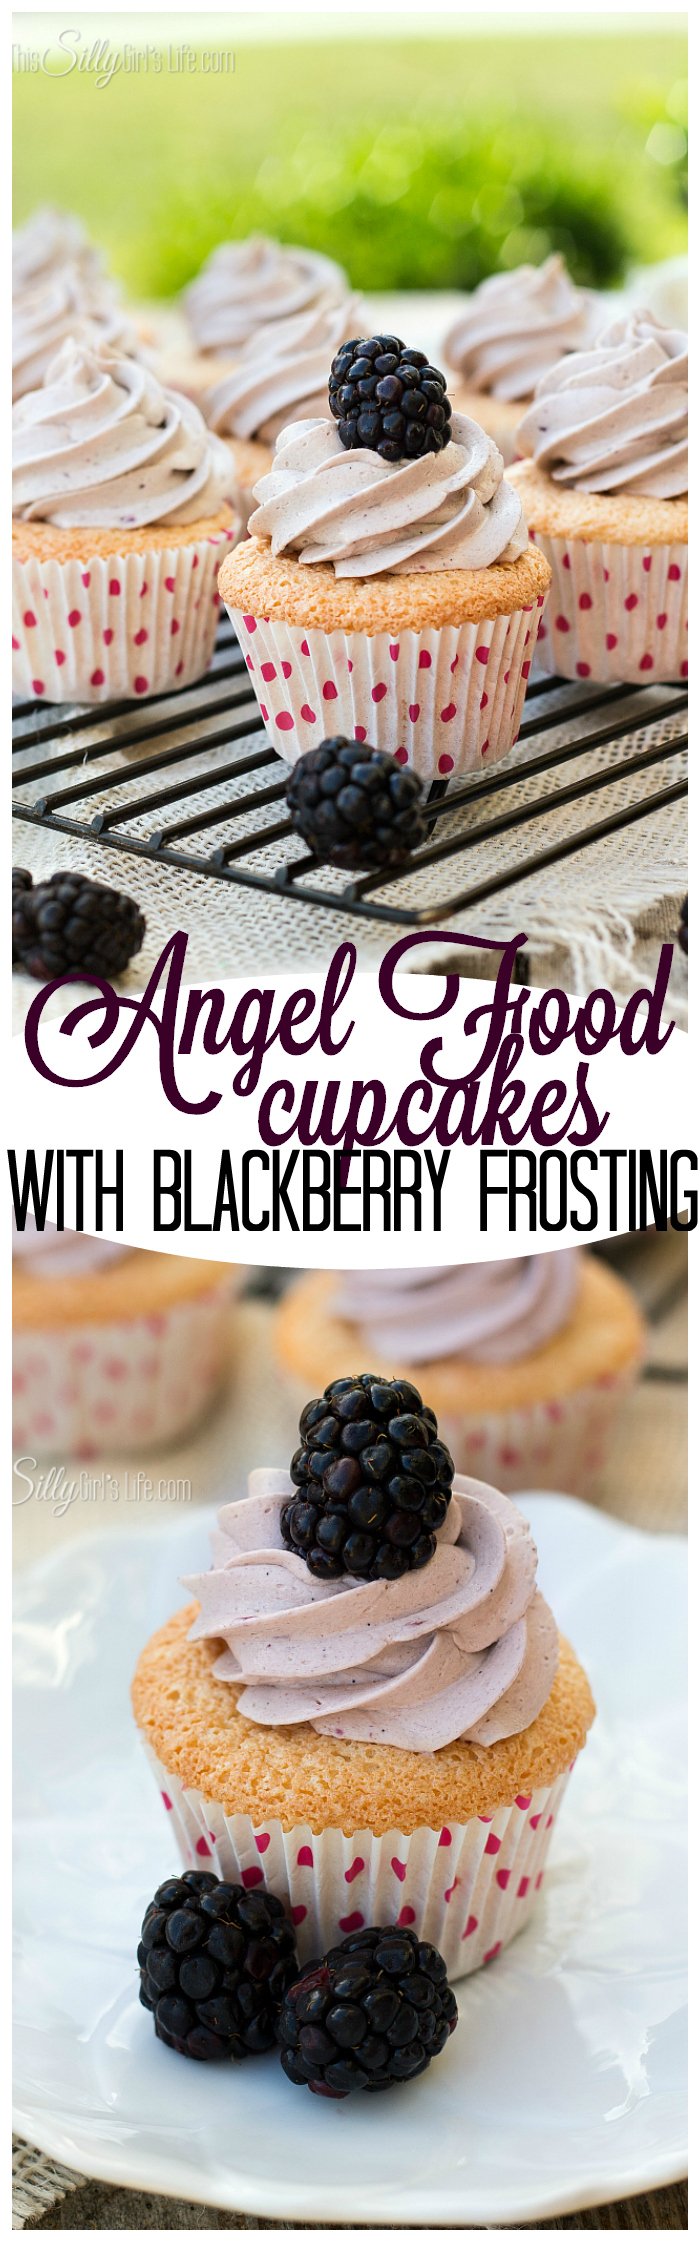 Angel Food Cupcakes with Blackberry Frosting, the lightest, airiest from scratch angel food cupcakes with sinfully sweet and smooth blackberry frosting. Hello, Summer! - ThisSillyGirlsLife.com